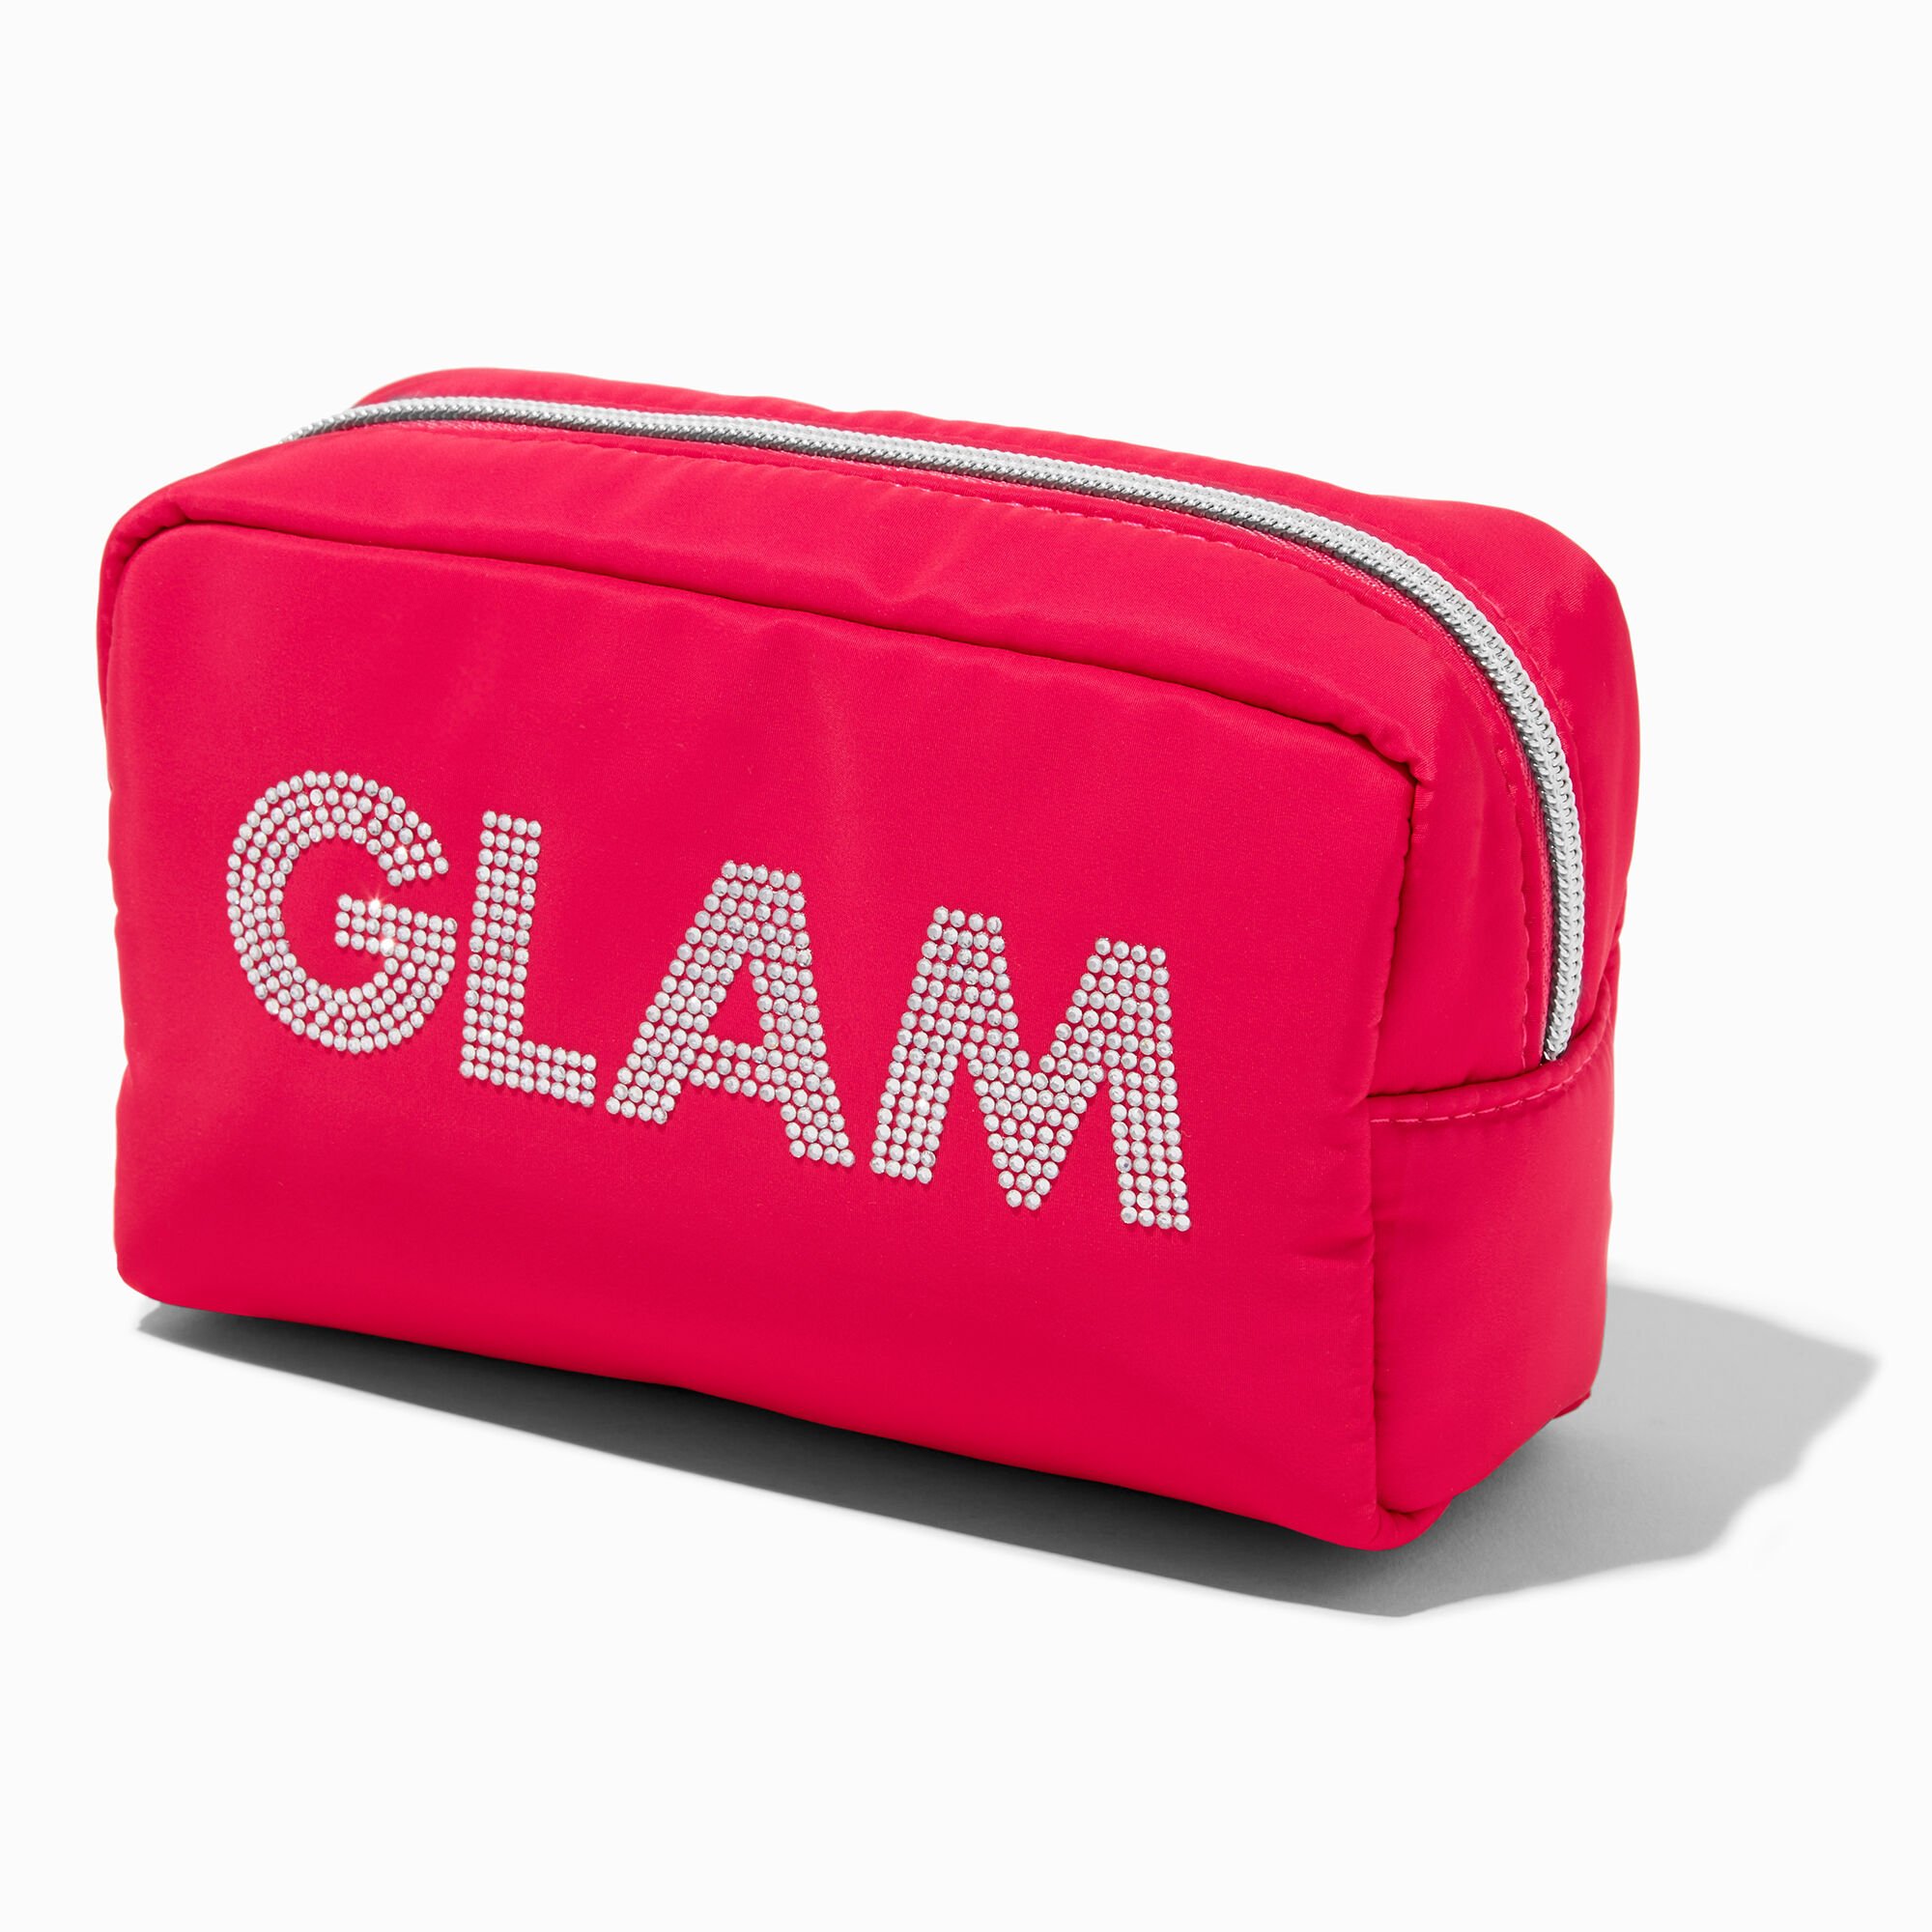 View Claires Glam Makeup Bag Pink information